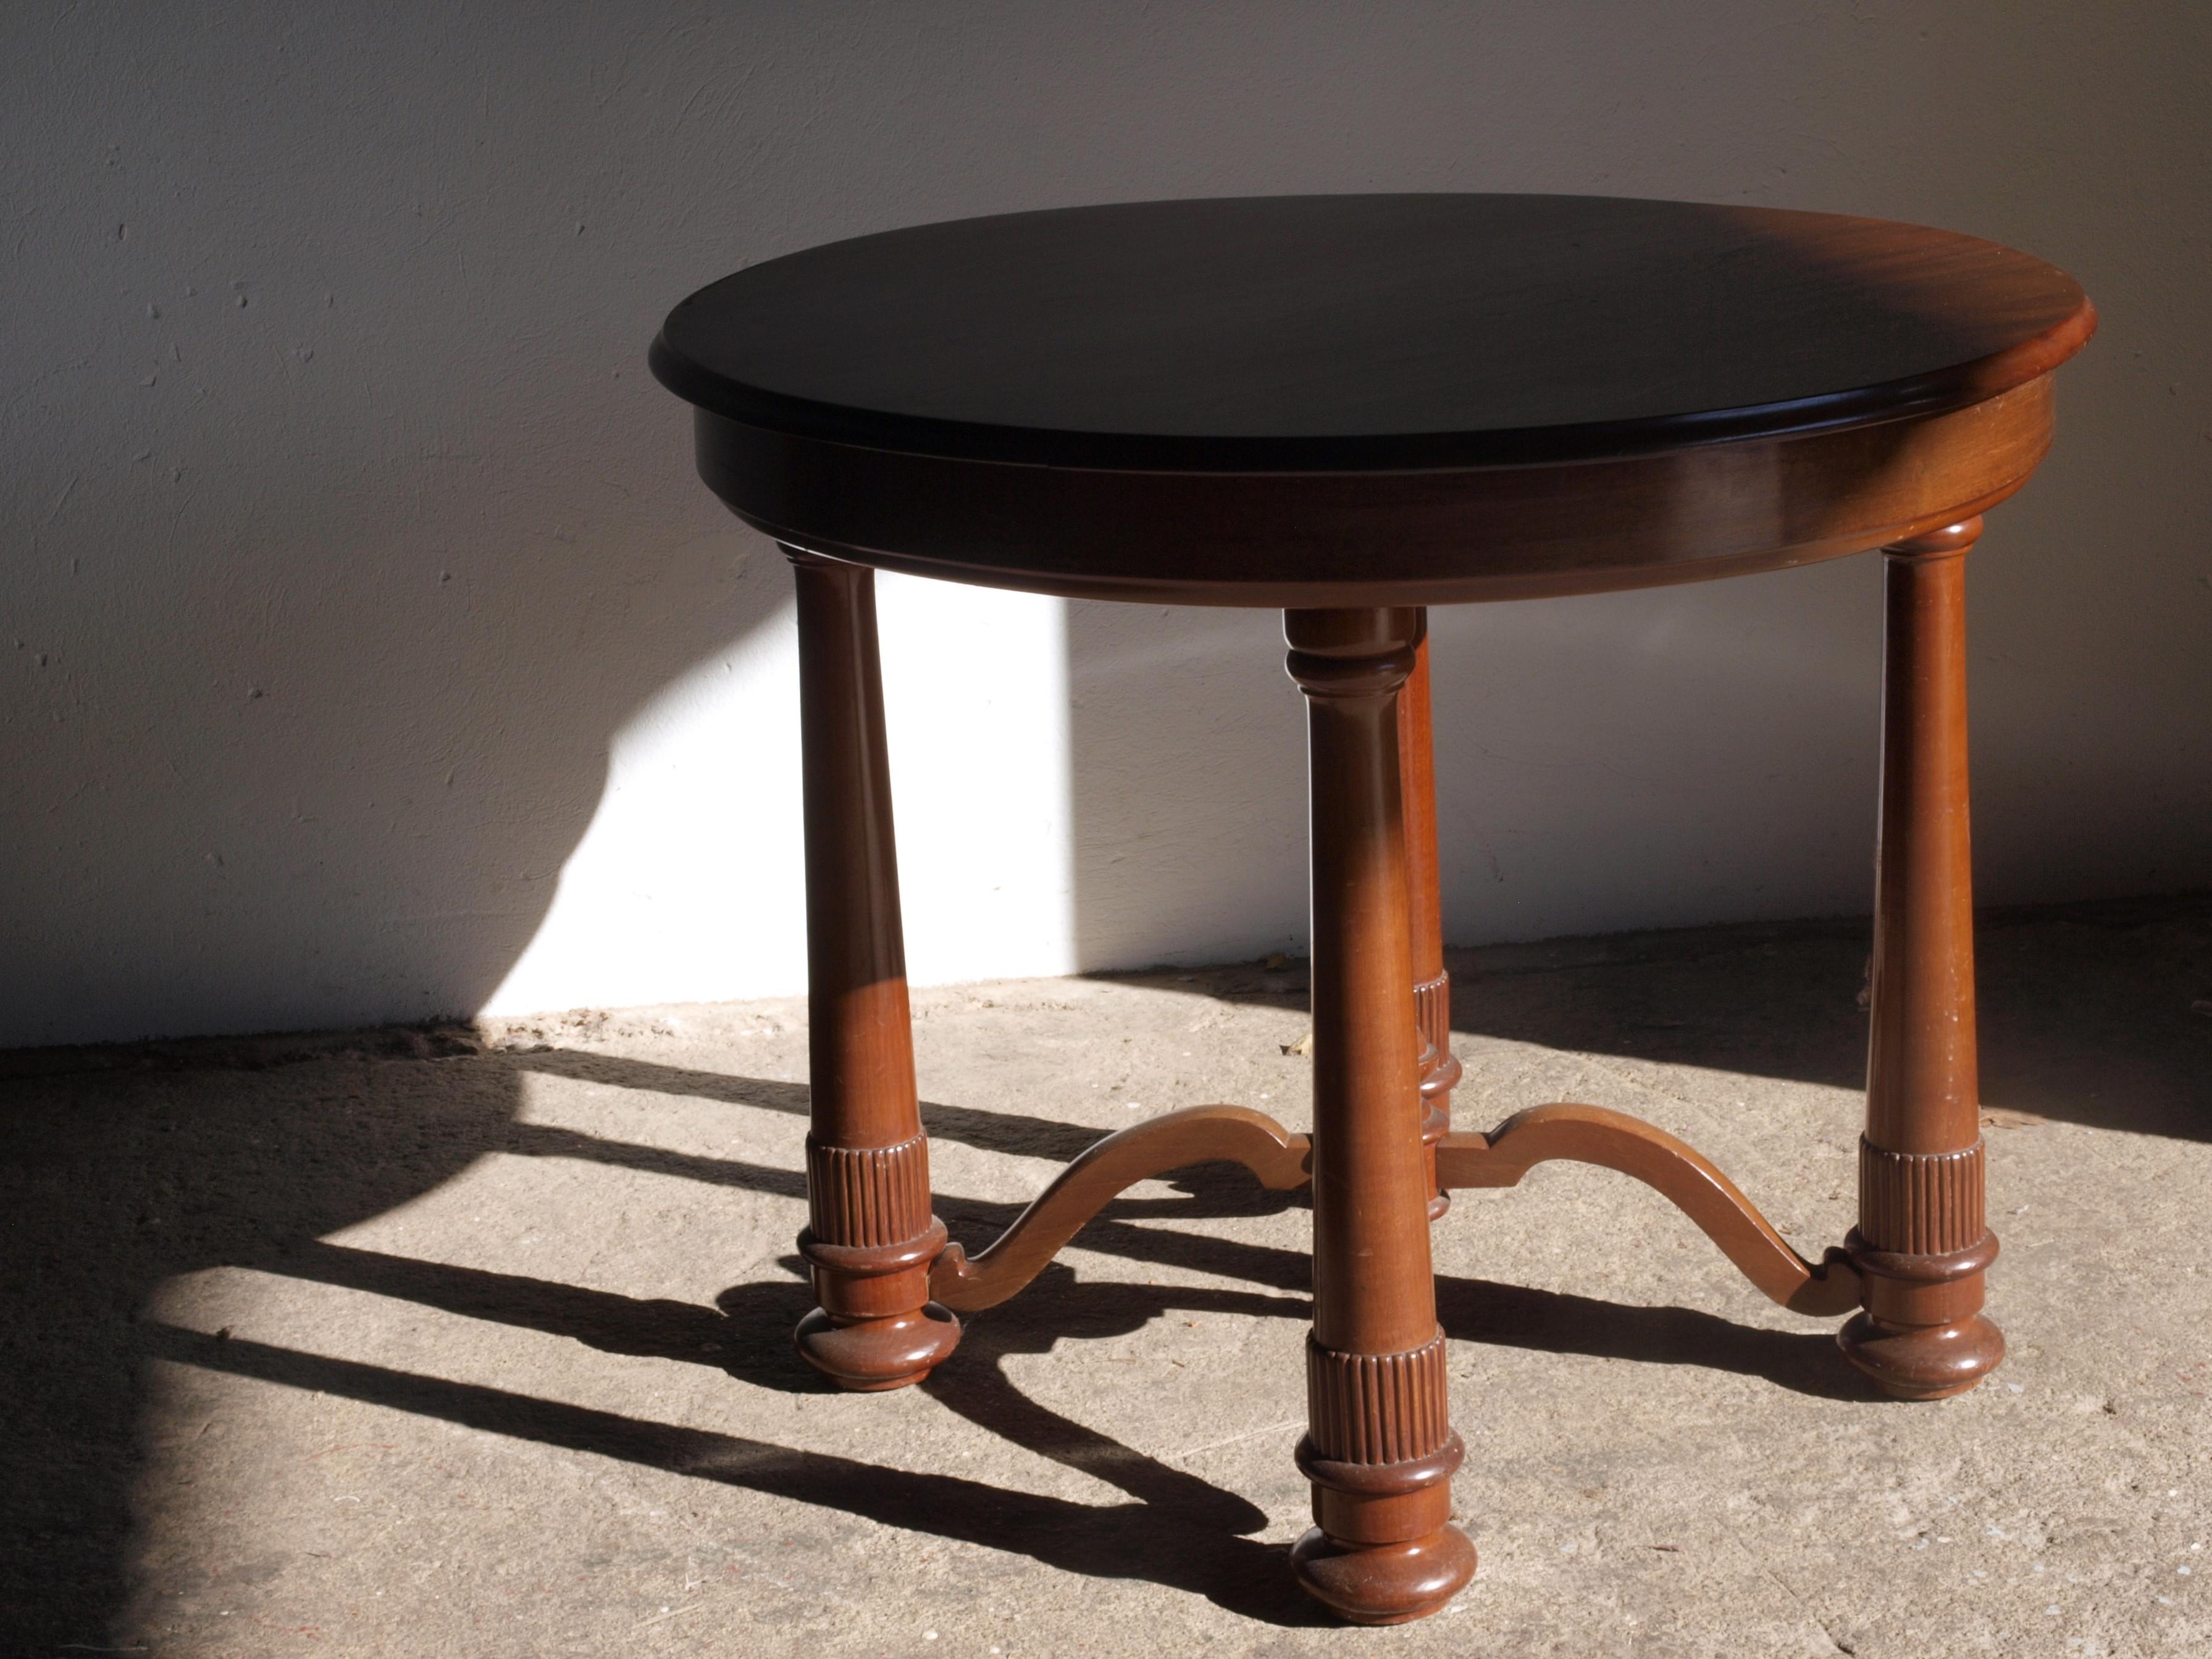 Lovely Art Deco table from the begging of the last century.

A small round table that will fit most of the modern homes. Use it as a writing table or a kitchen table for the breakfast in the morning.

Unique tavle, that you for sure will never find